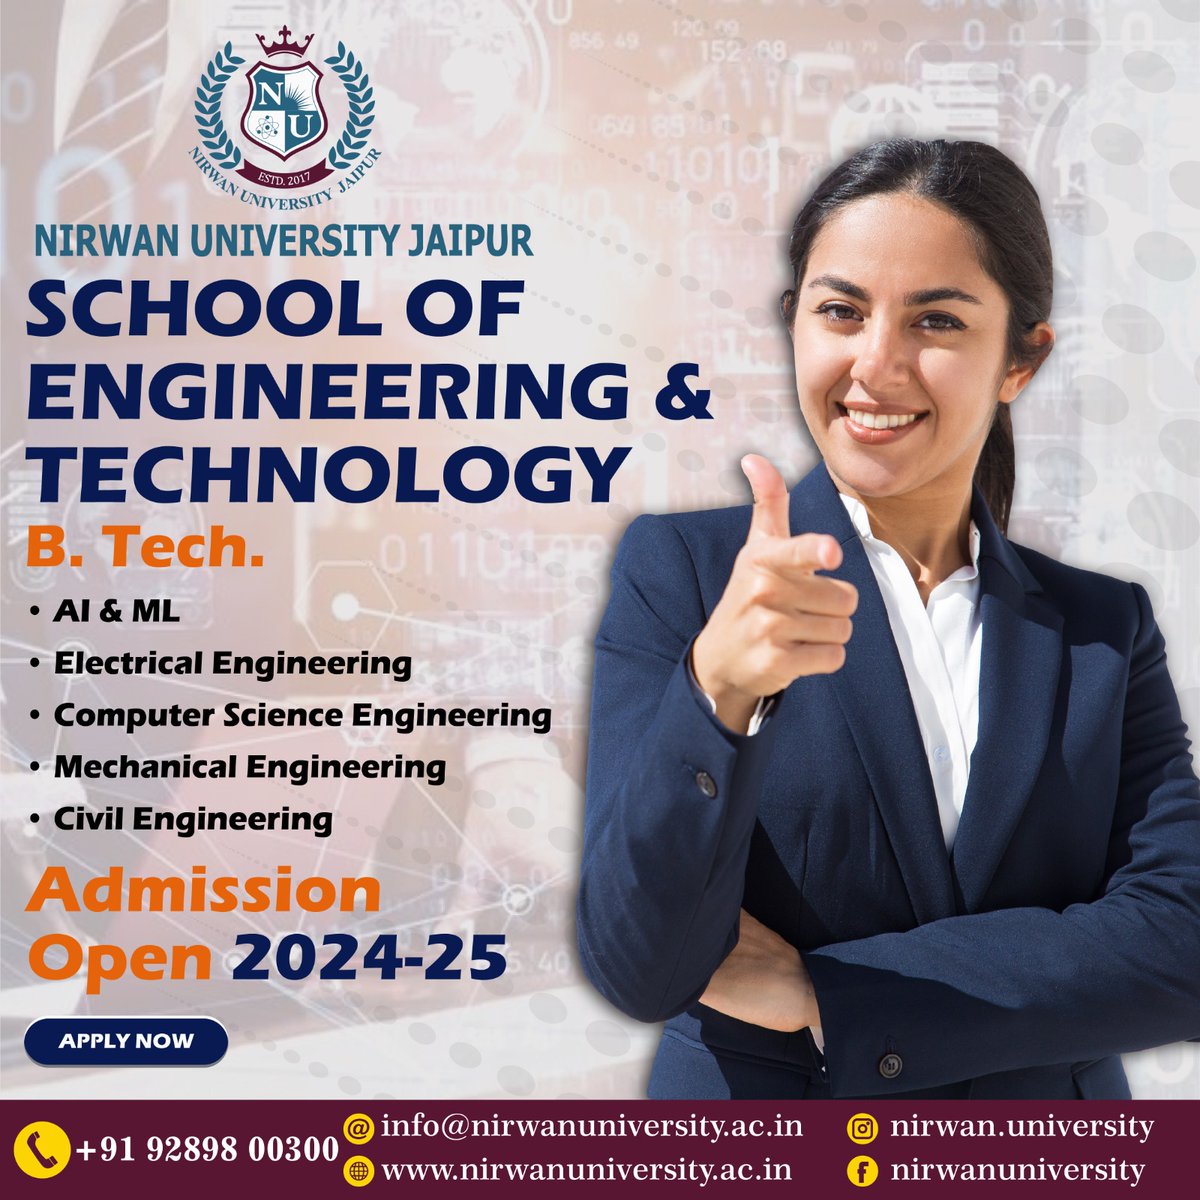 Explore limitless possibilities at Nirwan University Jaipur! 🚀 School of Engineering and Technology is now welcoming aspiring minds for the academic year 2024-25. Don't miss out on this opportunity, APPLY NOW! #NirwanUniversity #Engineering #AdmissionsOpen #BTech #AI #ML